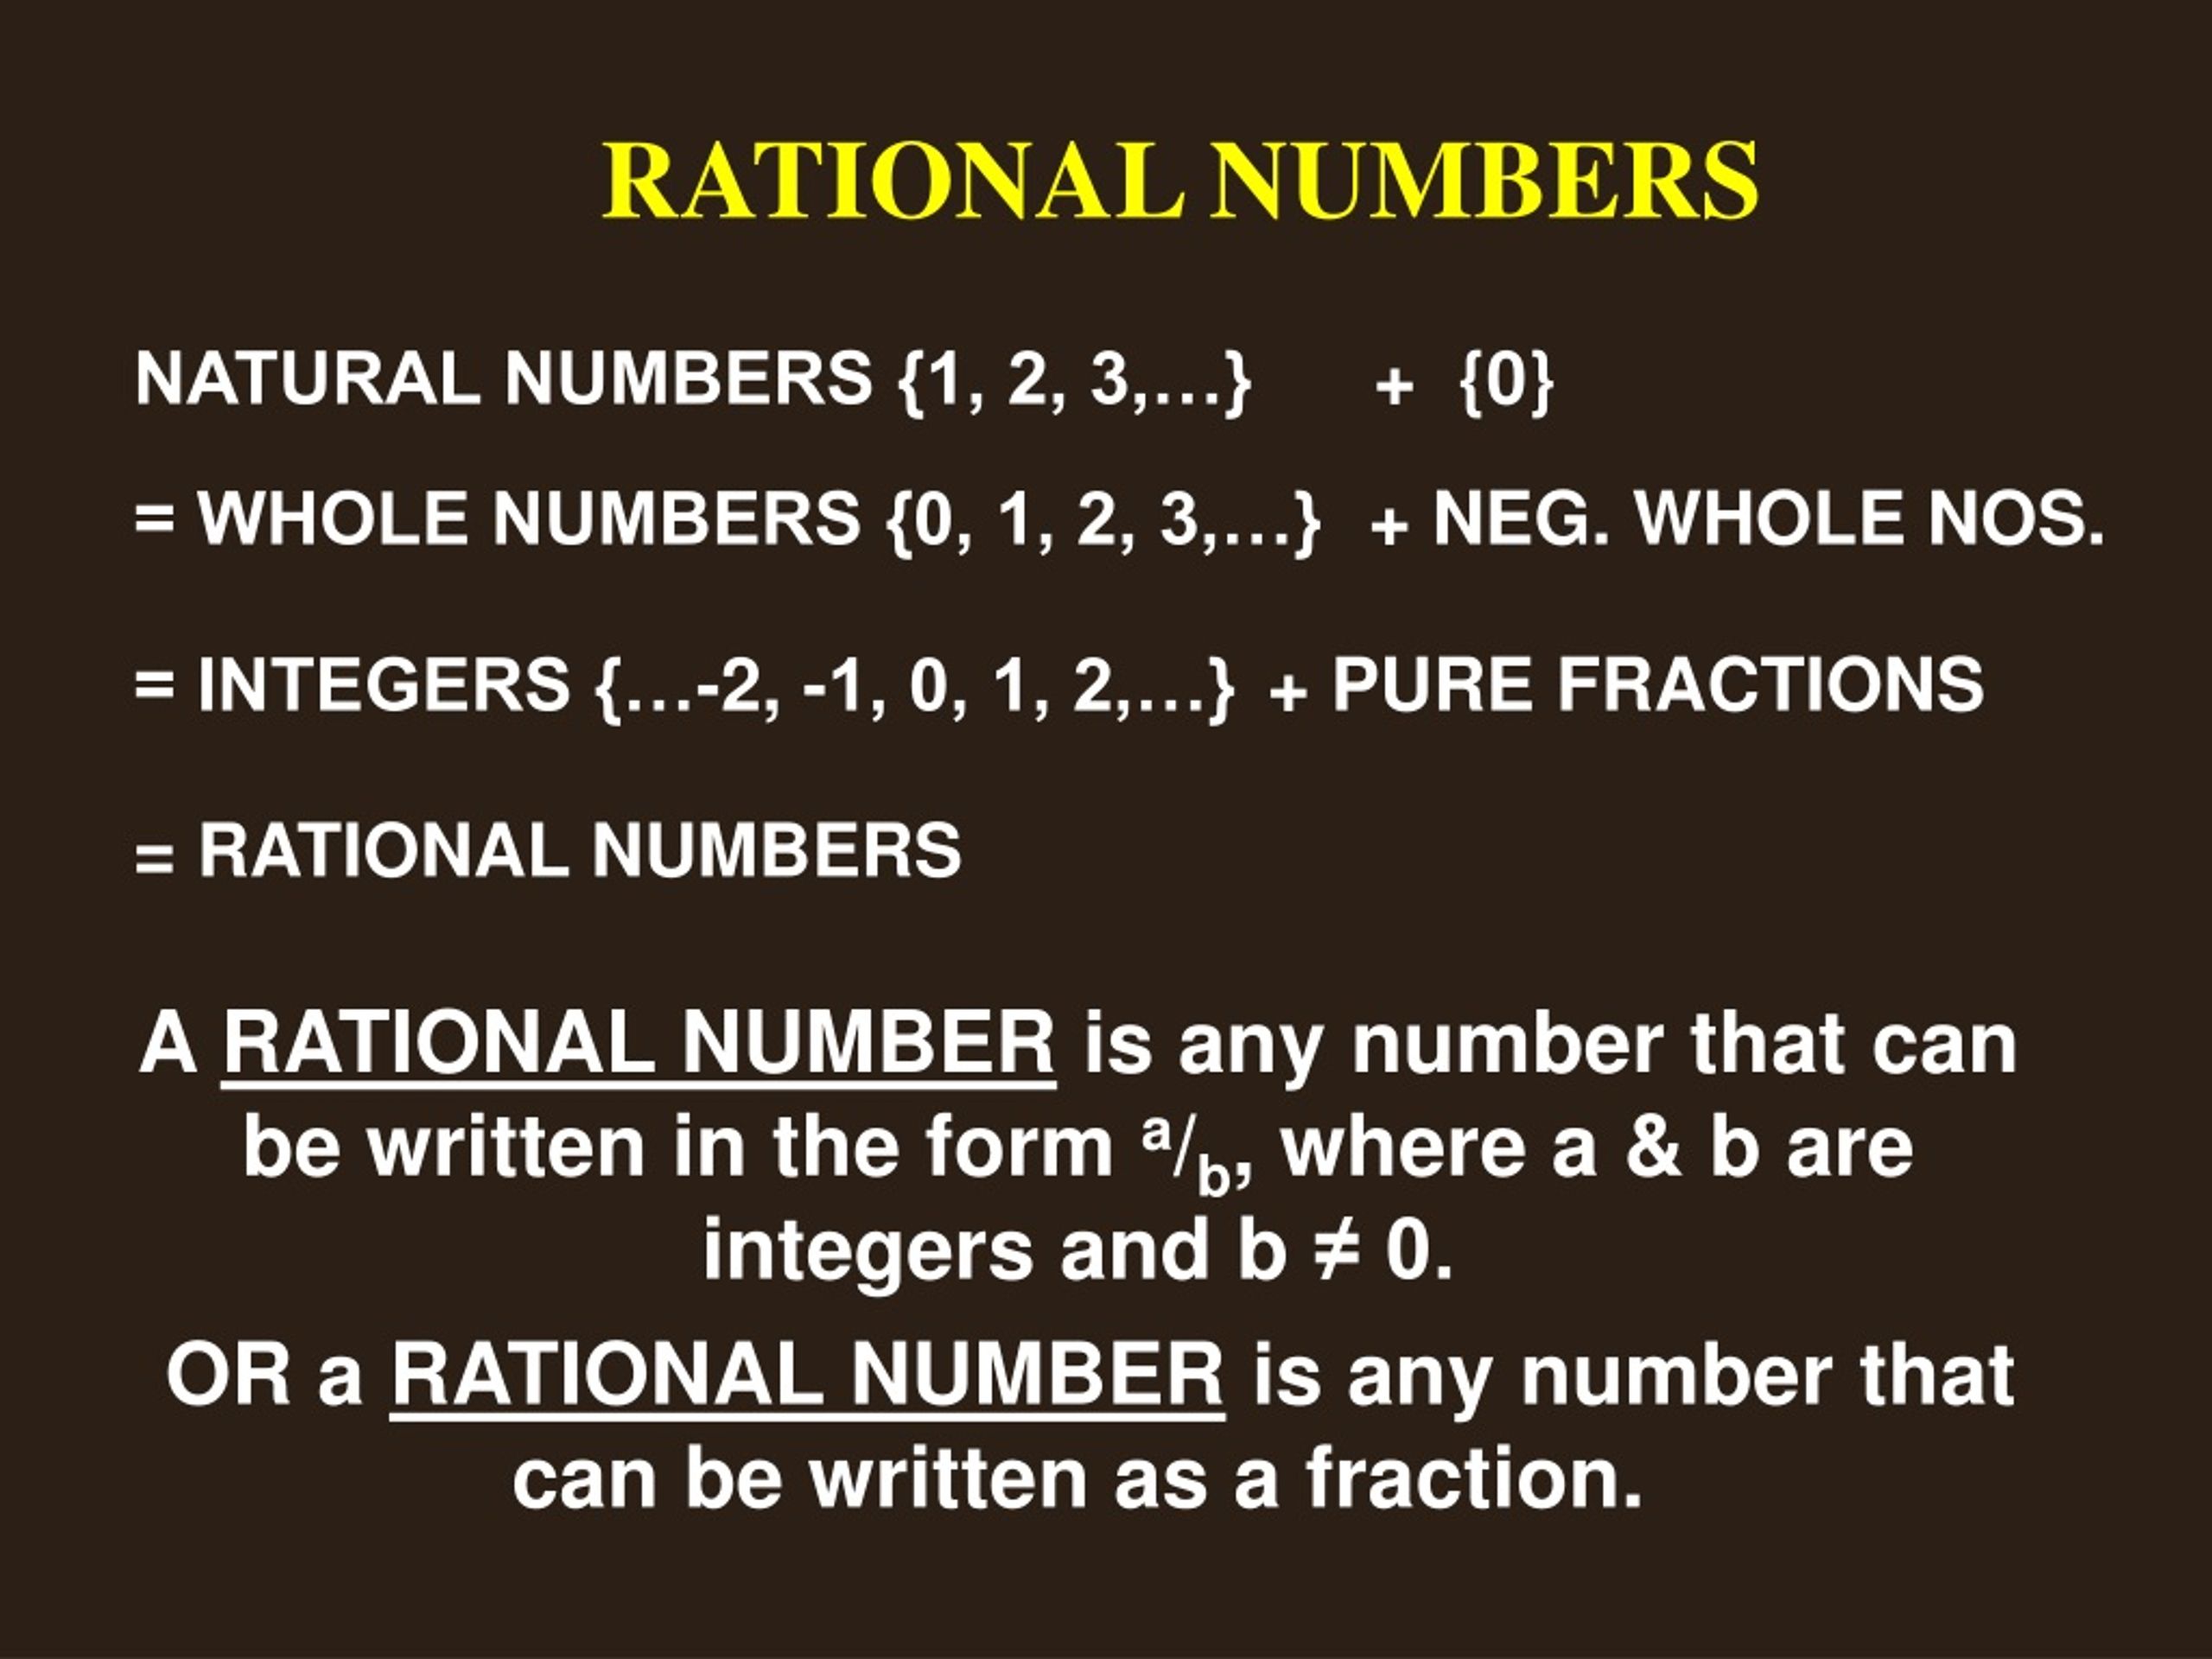 PPT - RATIONAL NUMBERS PowerPoint Presentation, free download - ID:8712233